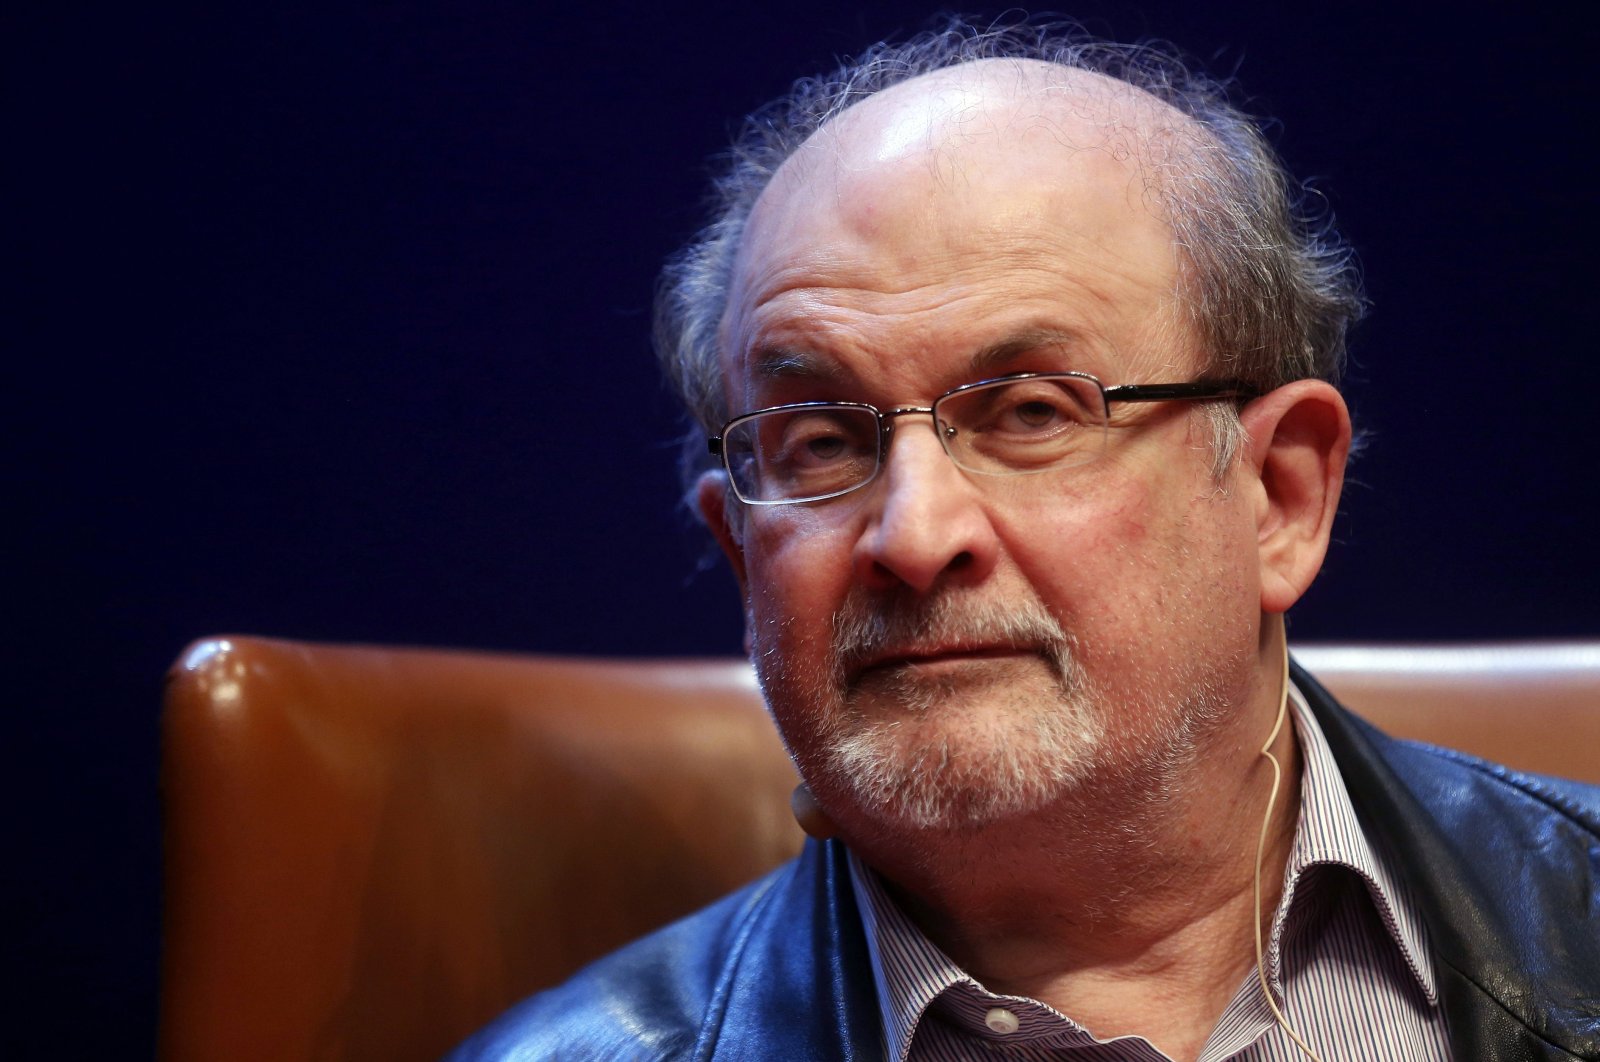 Salman Rushdie during an event in Aviles, Spain, Oct. 7, 2015. (EPA Photo)